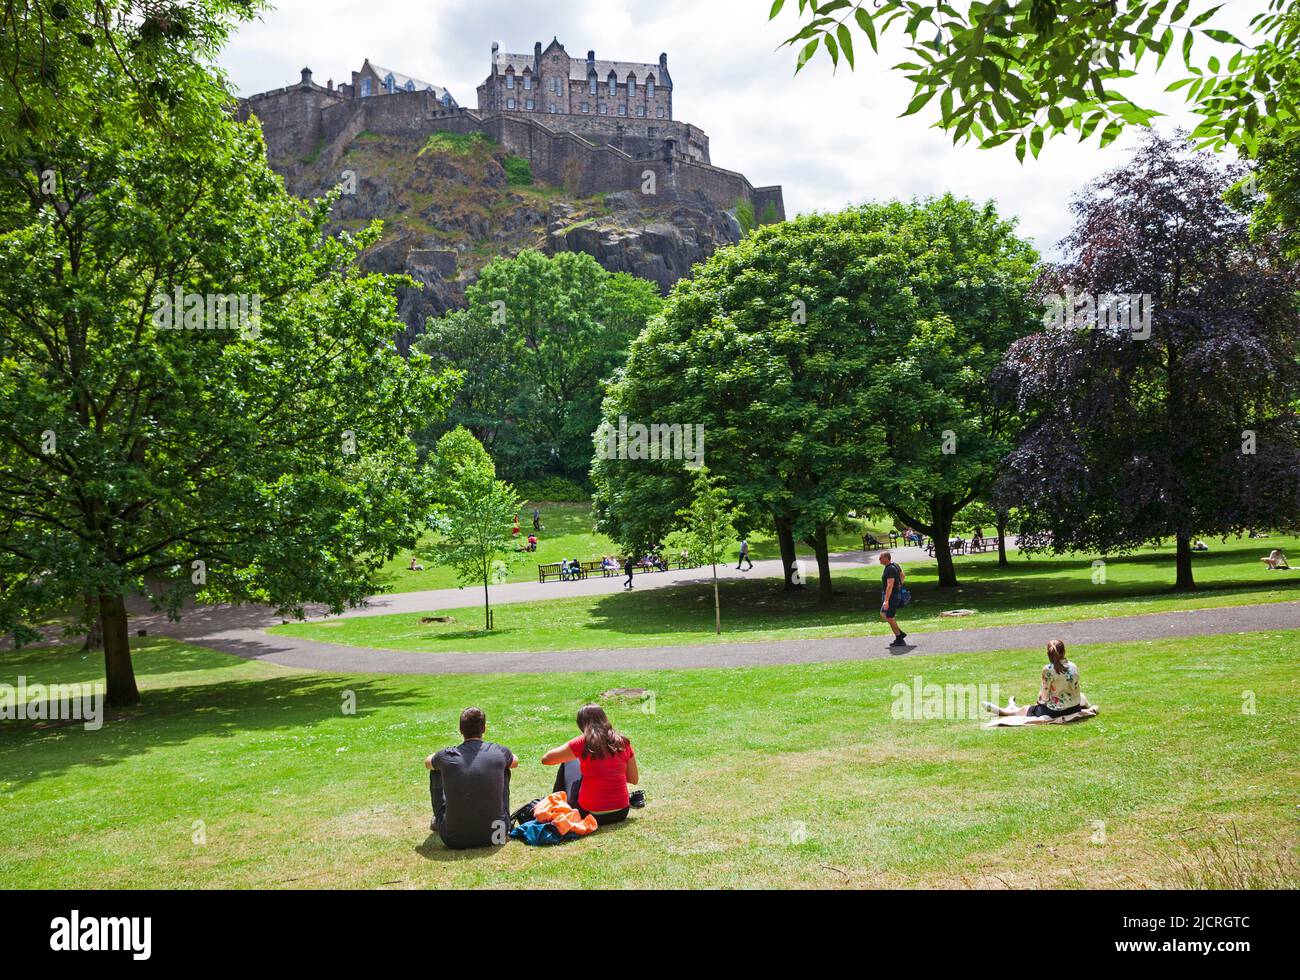 Edinburgh city centre, Scotland, UK. 15.06.2022. Summer arrives in the city after a recent cool cloudy period of weather. Mid-afternoon temperature of 18 degrees centigrade encouraging people out into the city's green spaces. Pictured: People relax in the sunshine in Princes Street Gardens West under the shadow of Edinburgh Castle Credit: Scottishcreative/alamy live news. Stock Photo